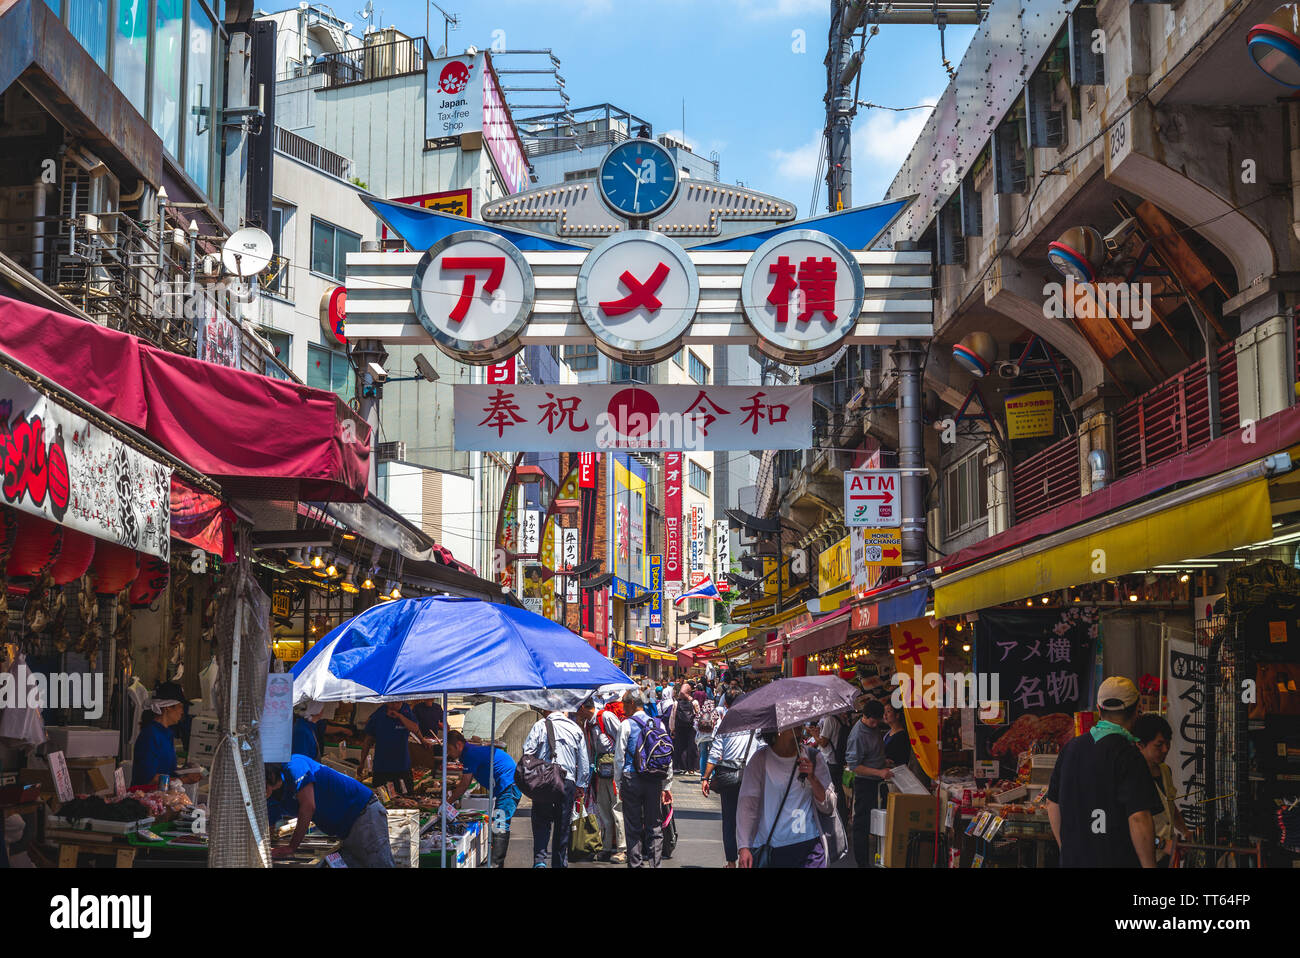 Tokyo, Japan - June 13, 2019: Ameya Yokocho, or Ameyoko, is a famous shopping arcade filled with around 400 shops. the street was the site of a black Stock Photo